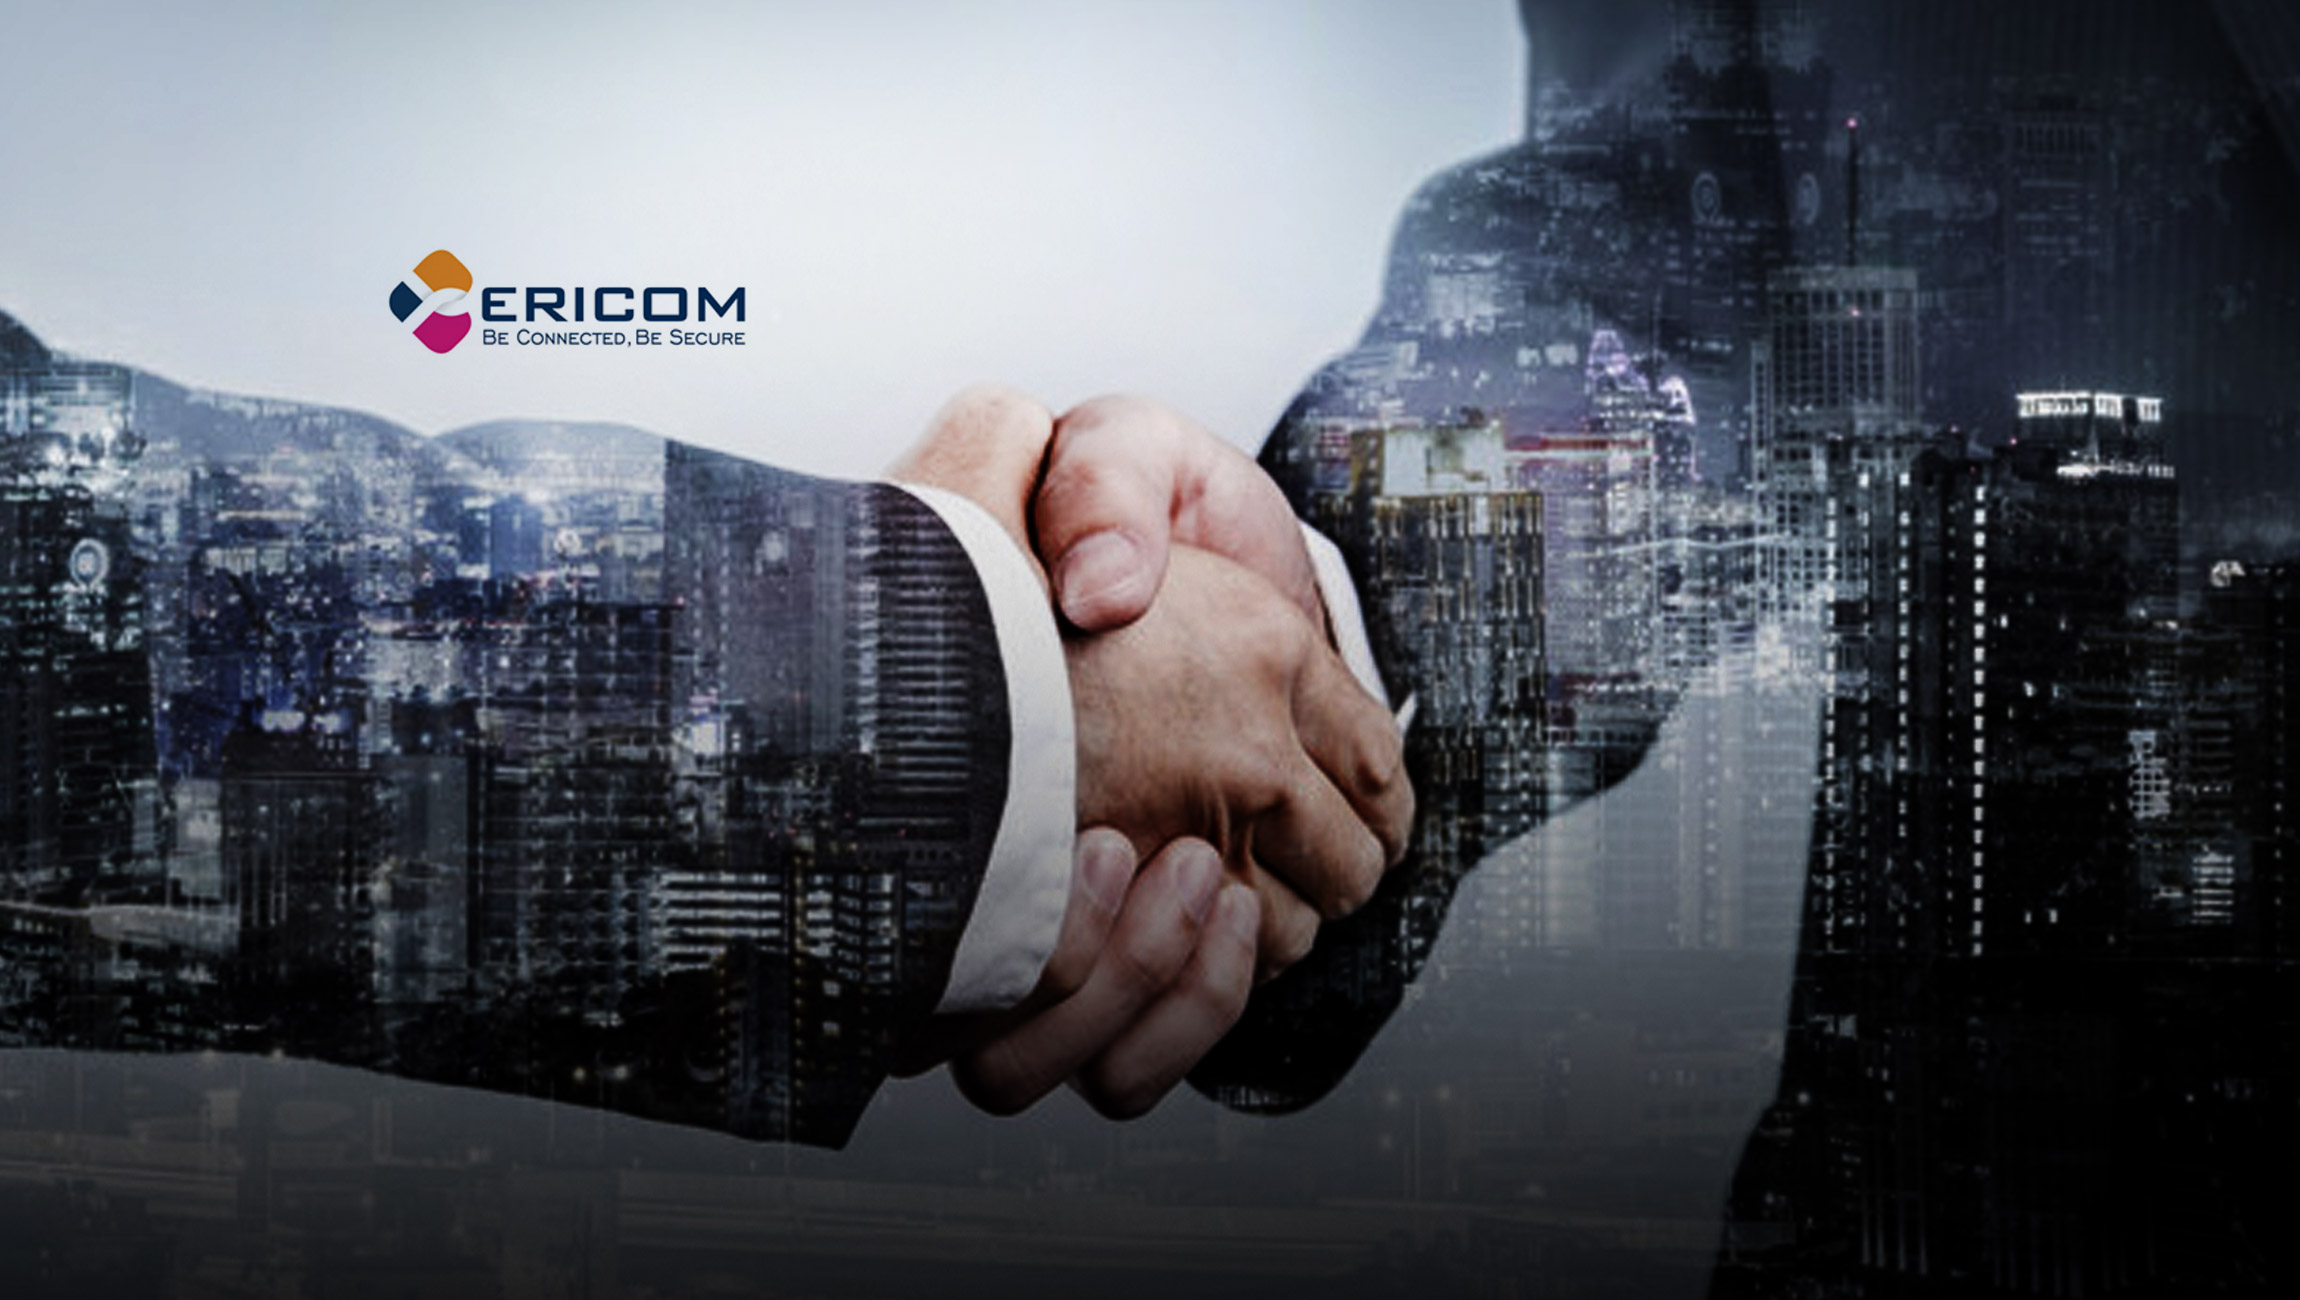 Ericom Channel Partner Program Enabling Security Resellers, Distributors, and MSSPs to Deliver a Comprehensive Set of Zero Trust Secure Access Solutions